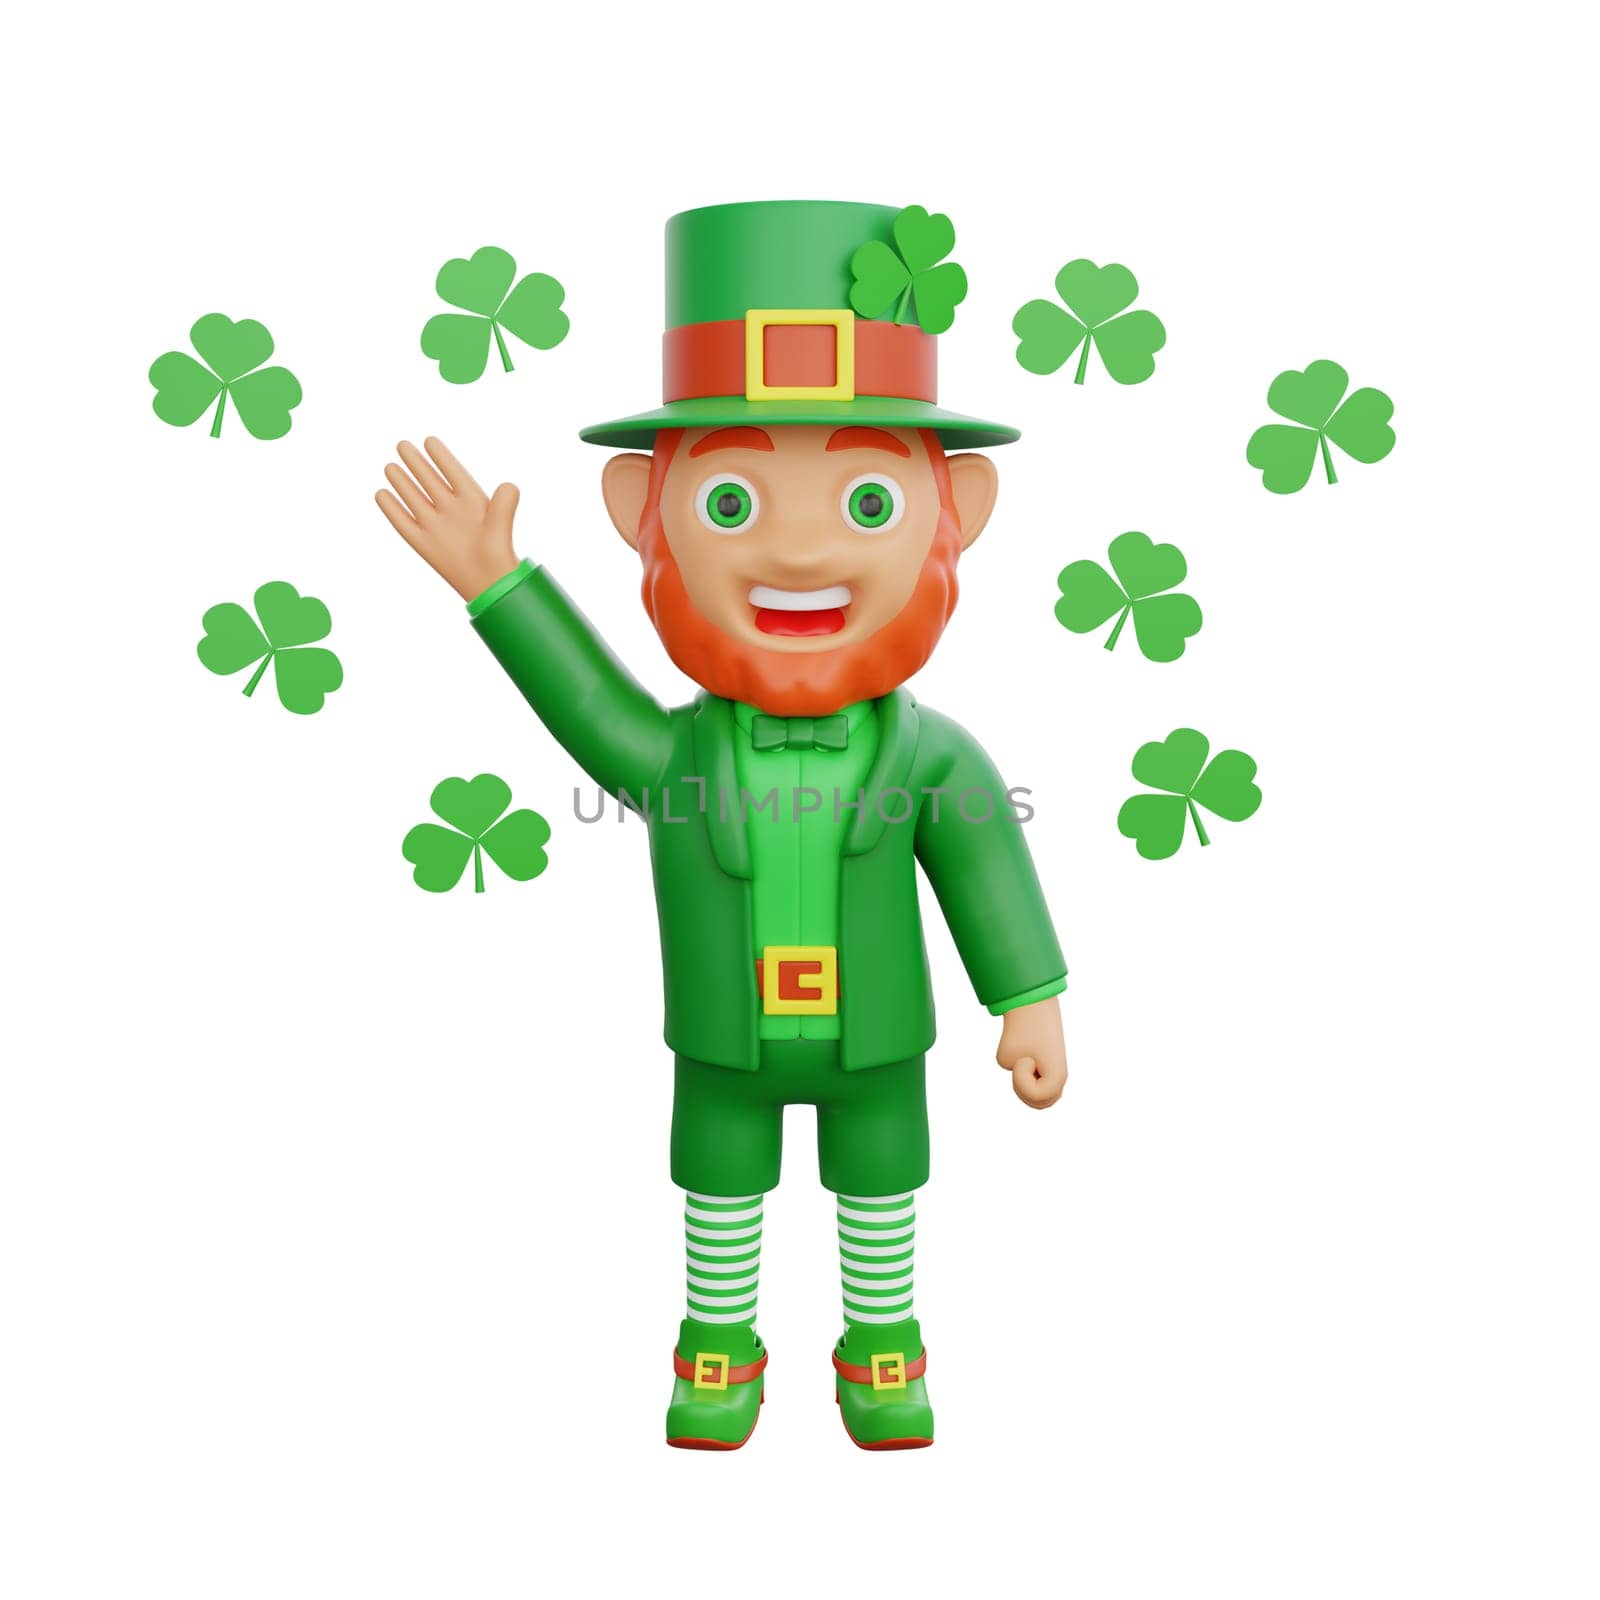 3D illustration of a joyful leprechaun waving while surrounded by clover leaves, perfect for St. Patrick's Day themed projects